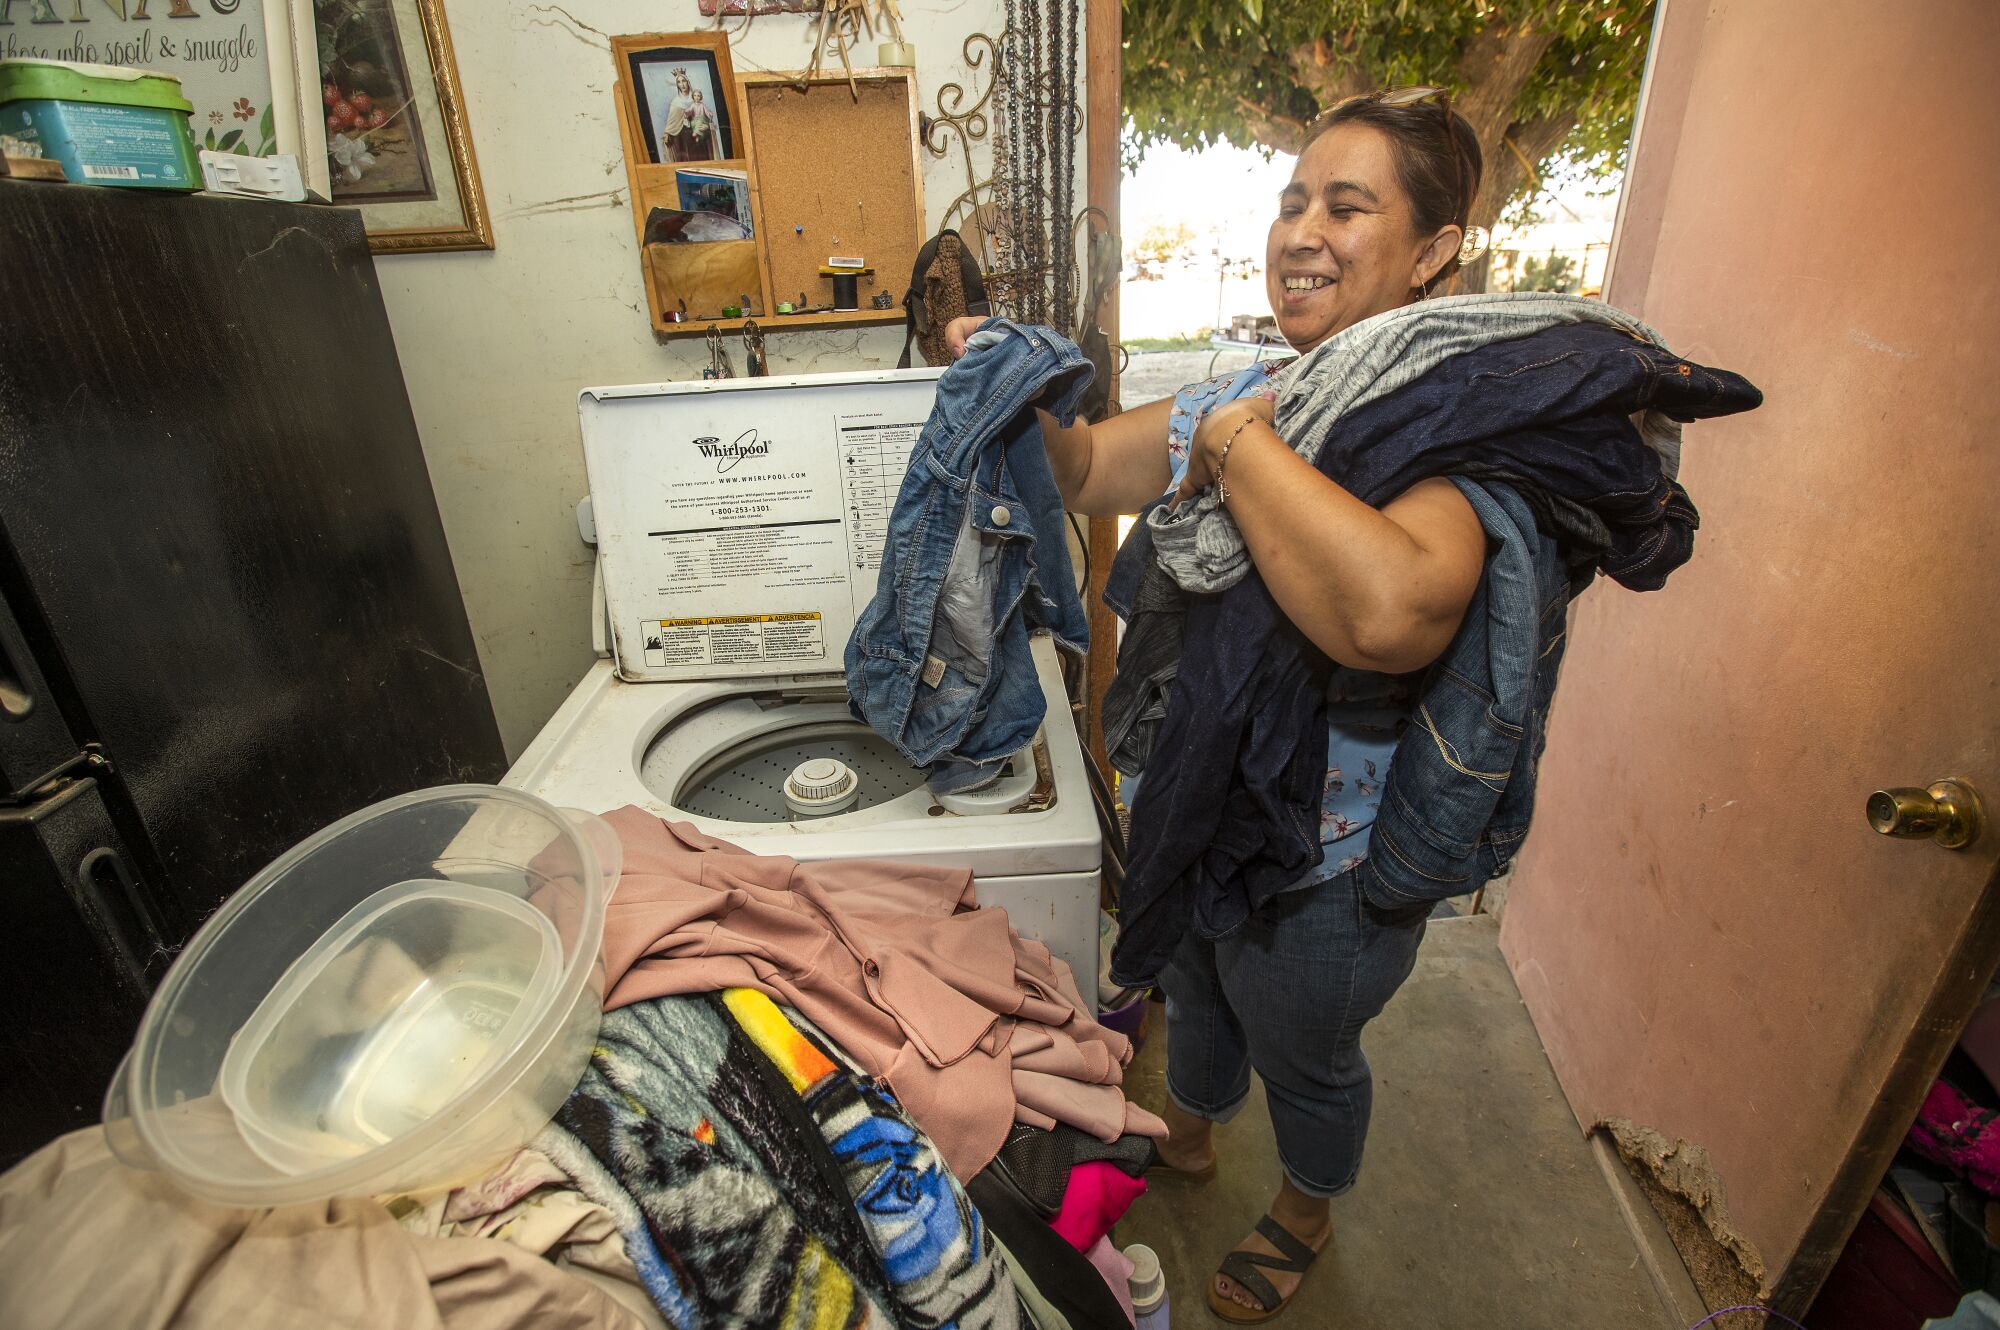 A woman removes clothing from a washing machine